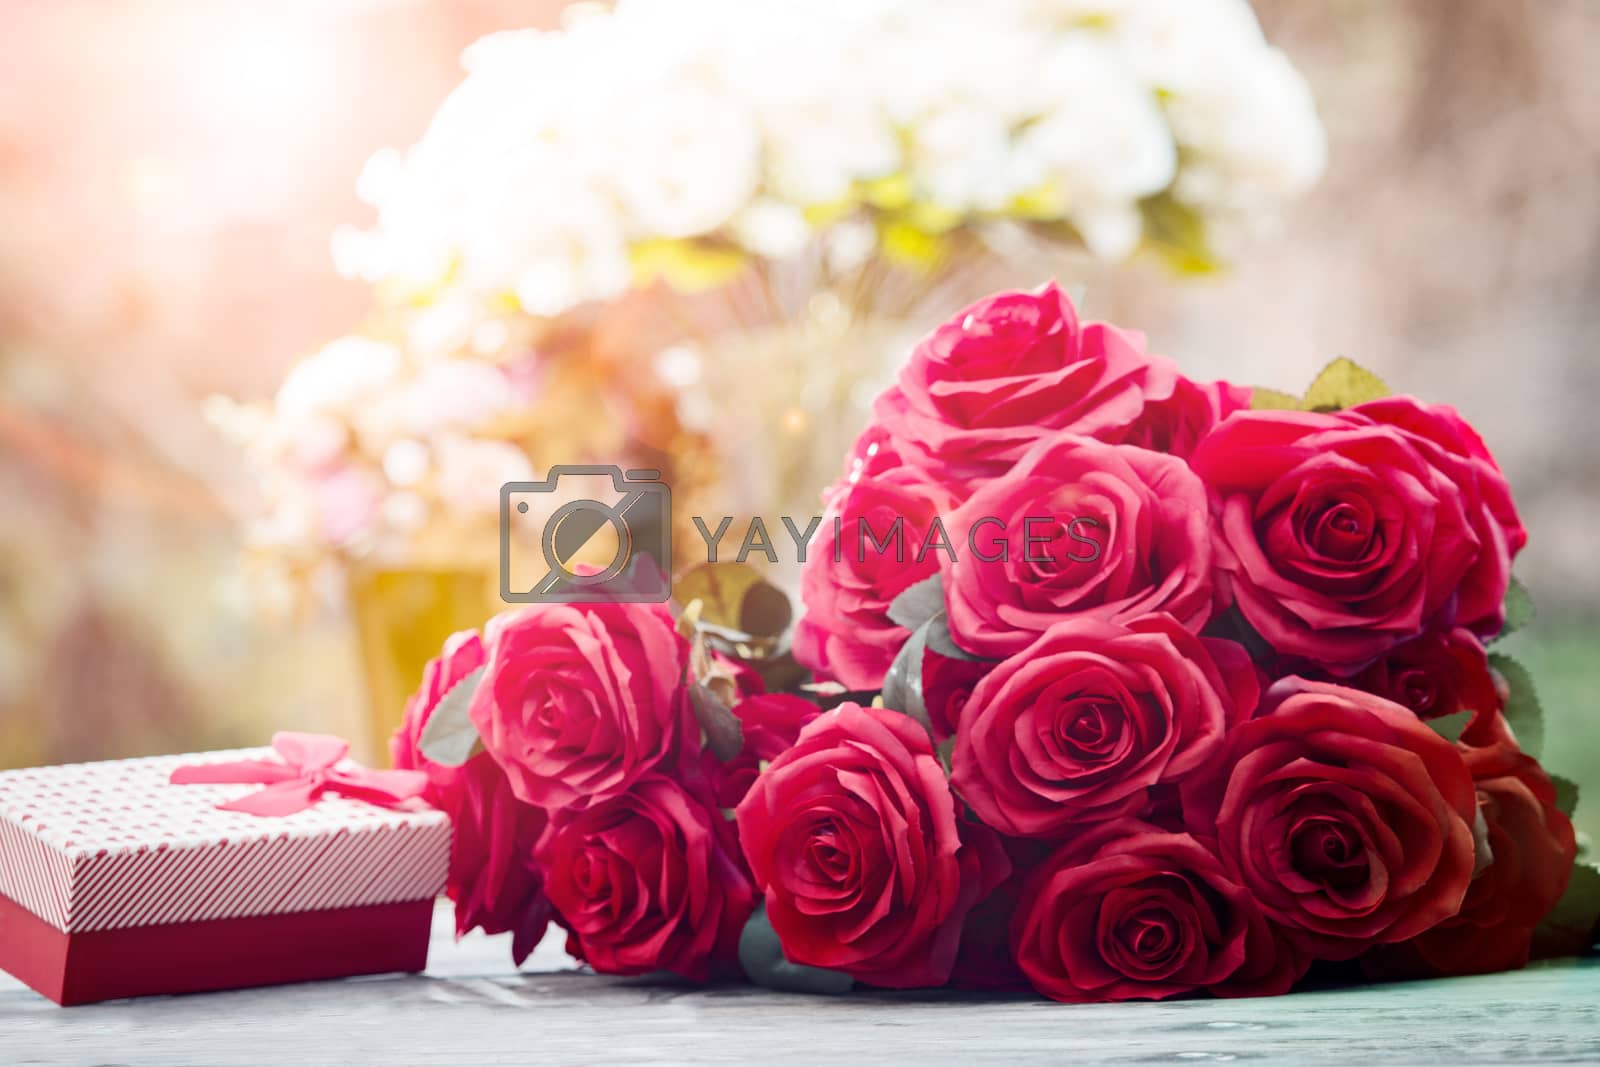 Royalty free image of red roses flowers with valentine festival gift and beautiful blu by khunaspix